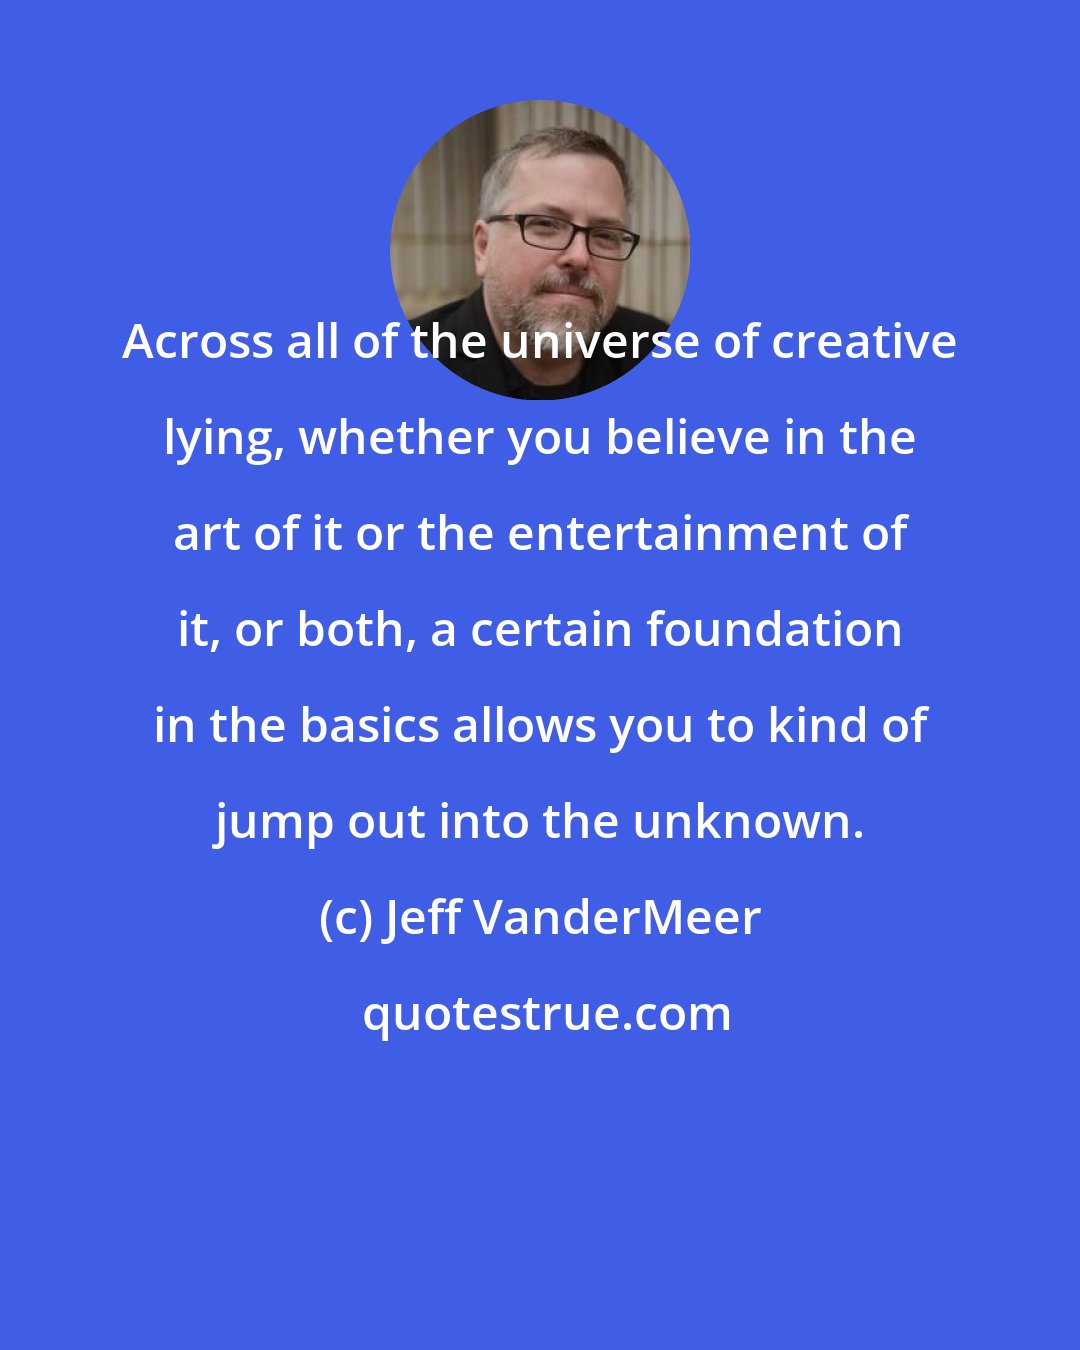 Jeff VanderMeer: Across all of the universe of creative lying, whether you believe in the art of it or the entertainment of it, or both, a certain foundation in the basics allows you to kind of jump out into the unknown.